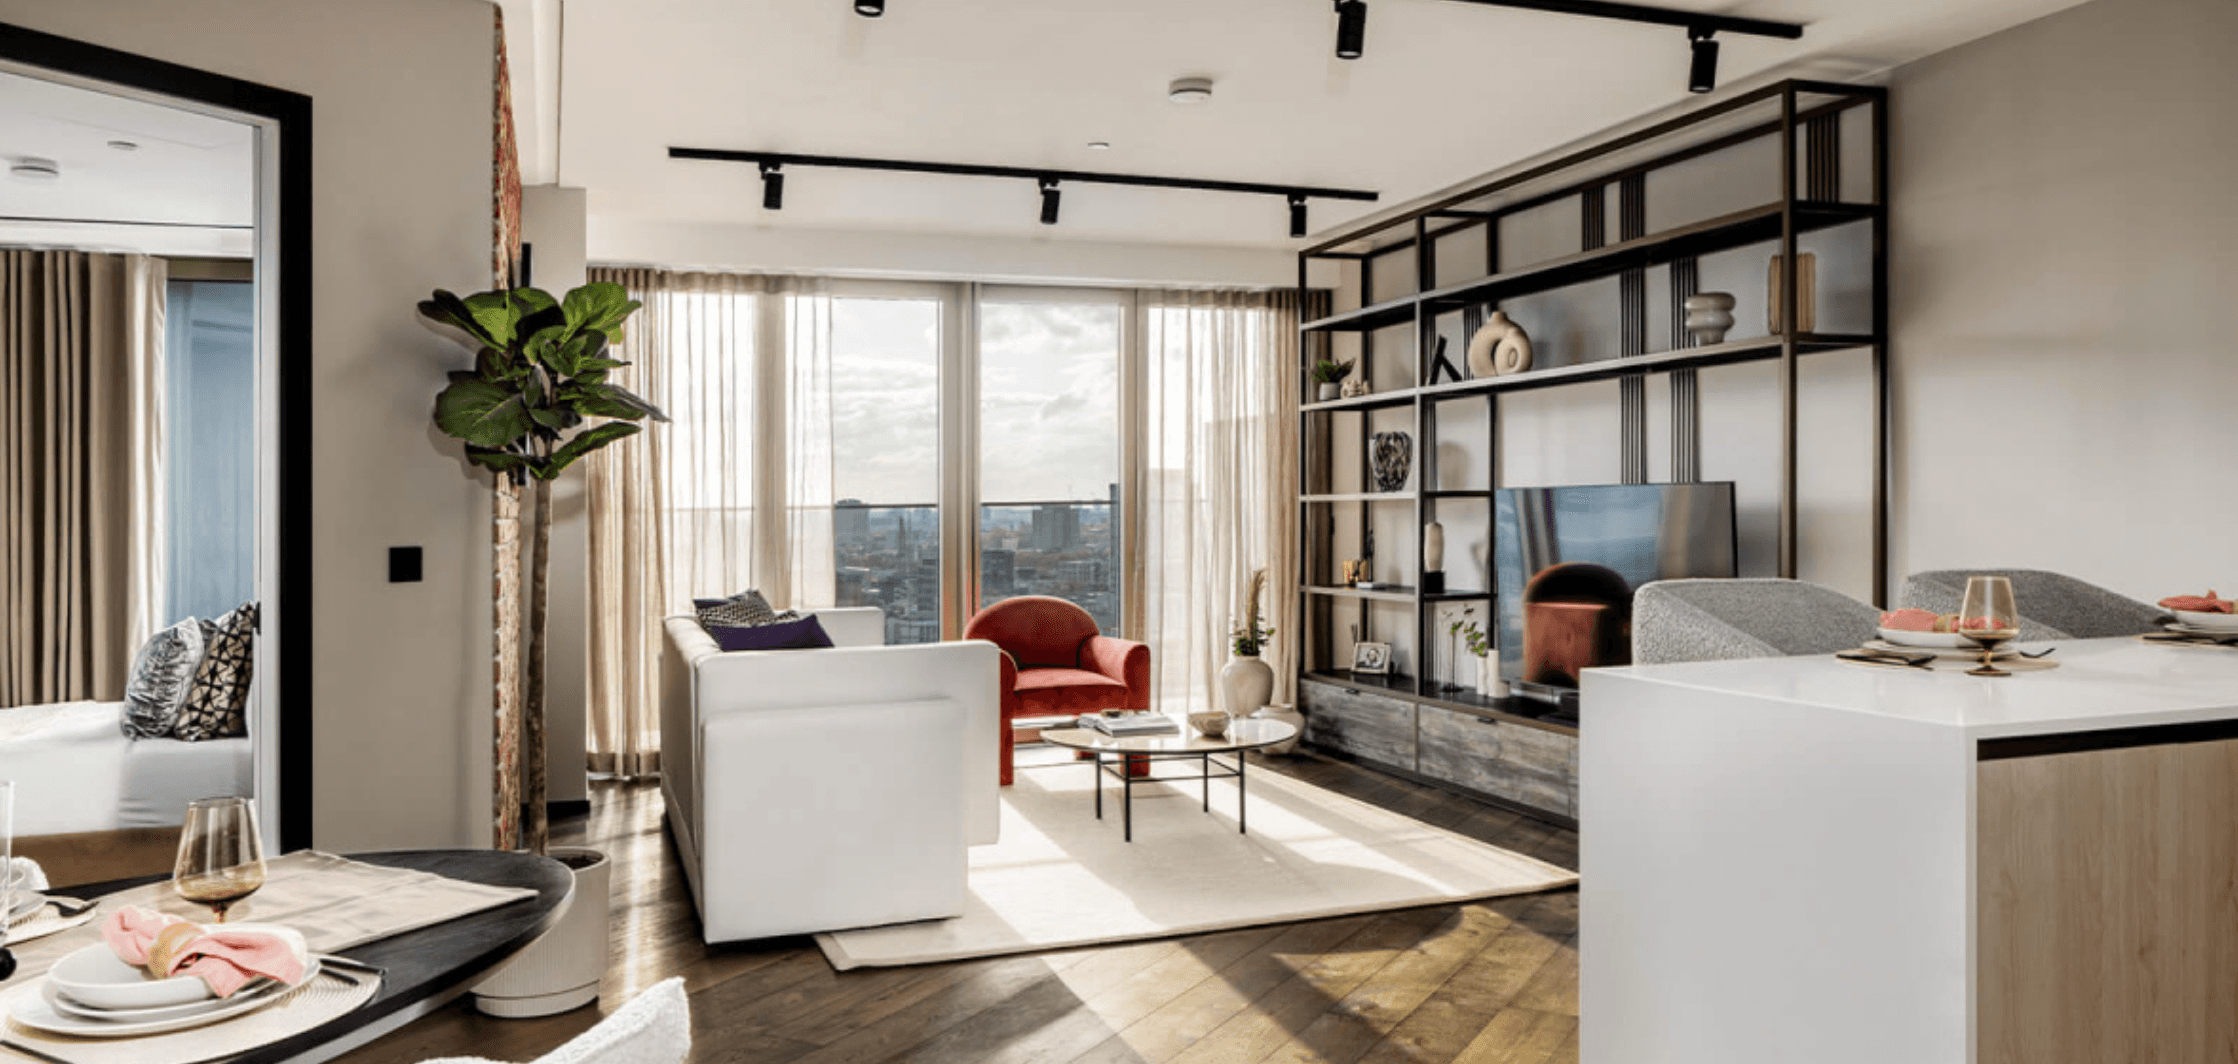 Luxury 2 Bedroom Flat For Sale in Shoreditch